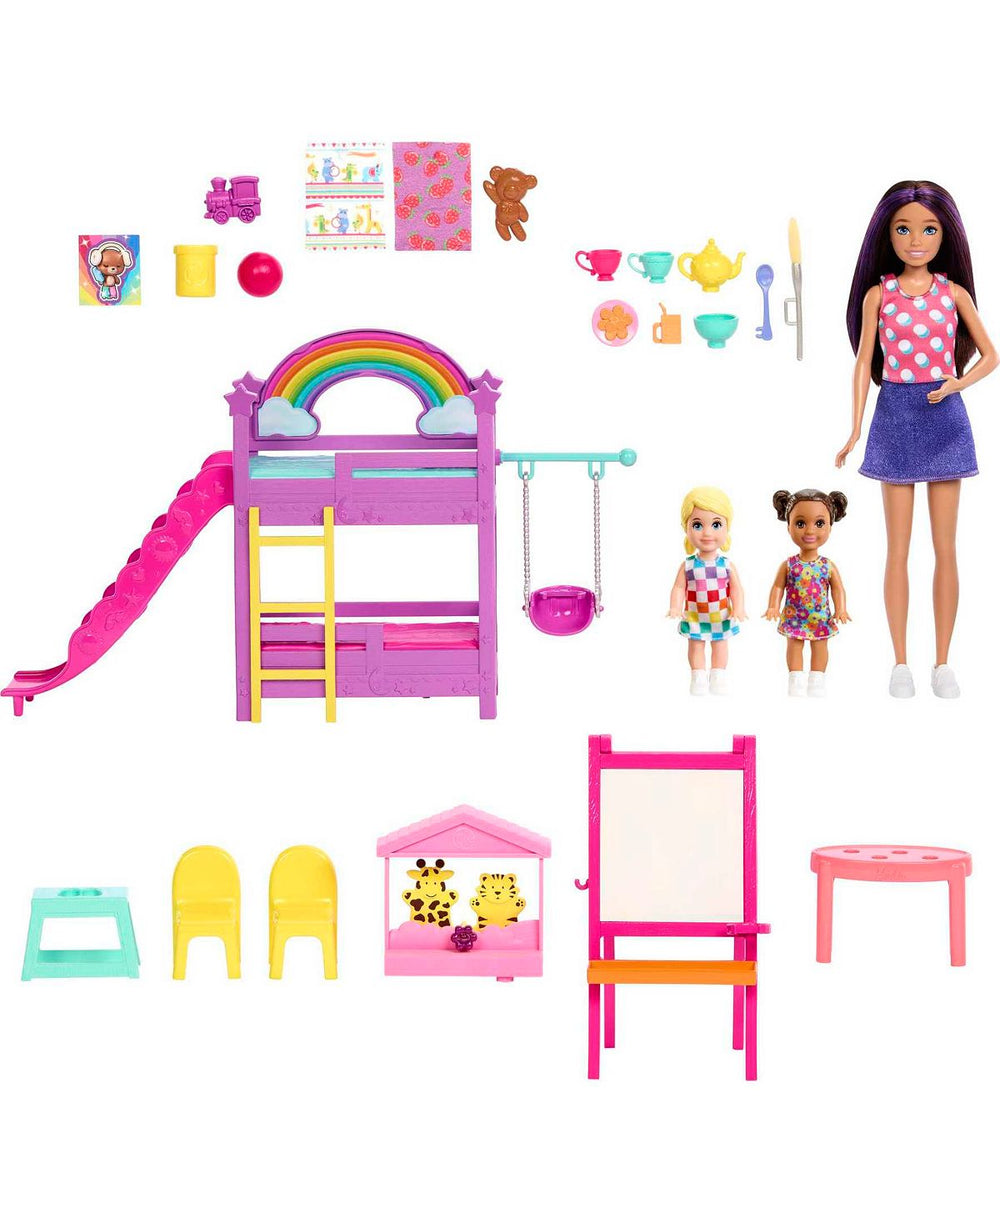 Barbie Skipper Babysitters Inc. Daycare Playset with 3 Dolls and Accessories